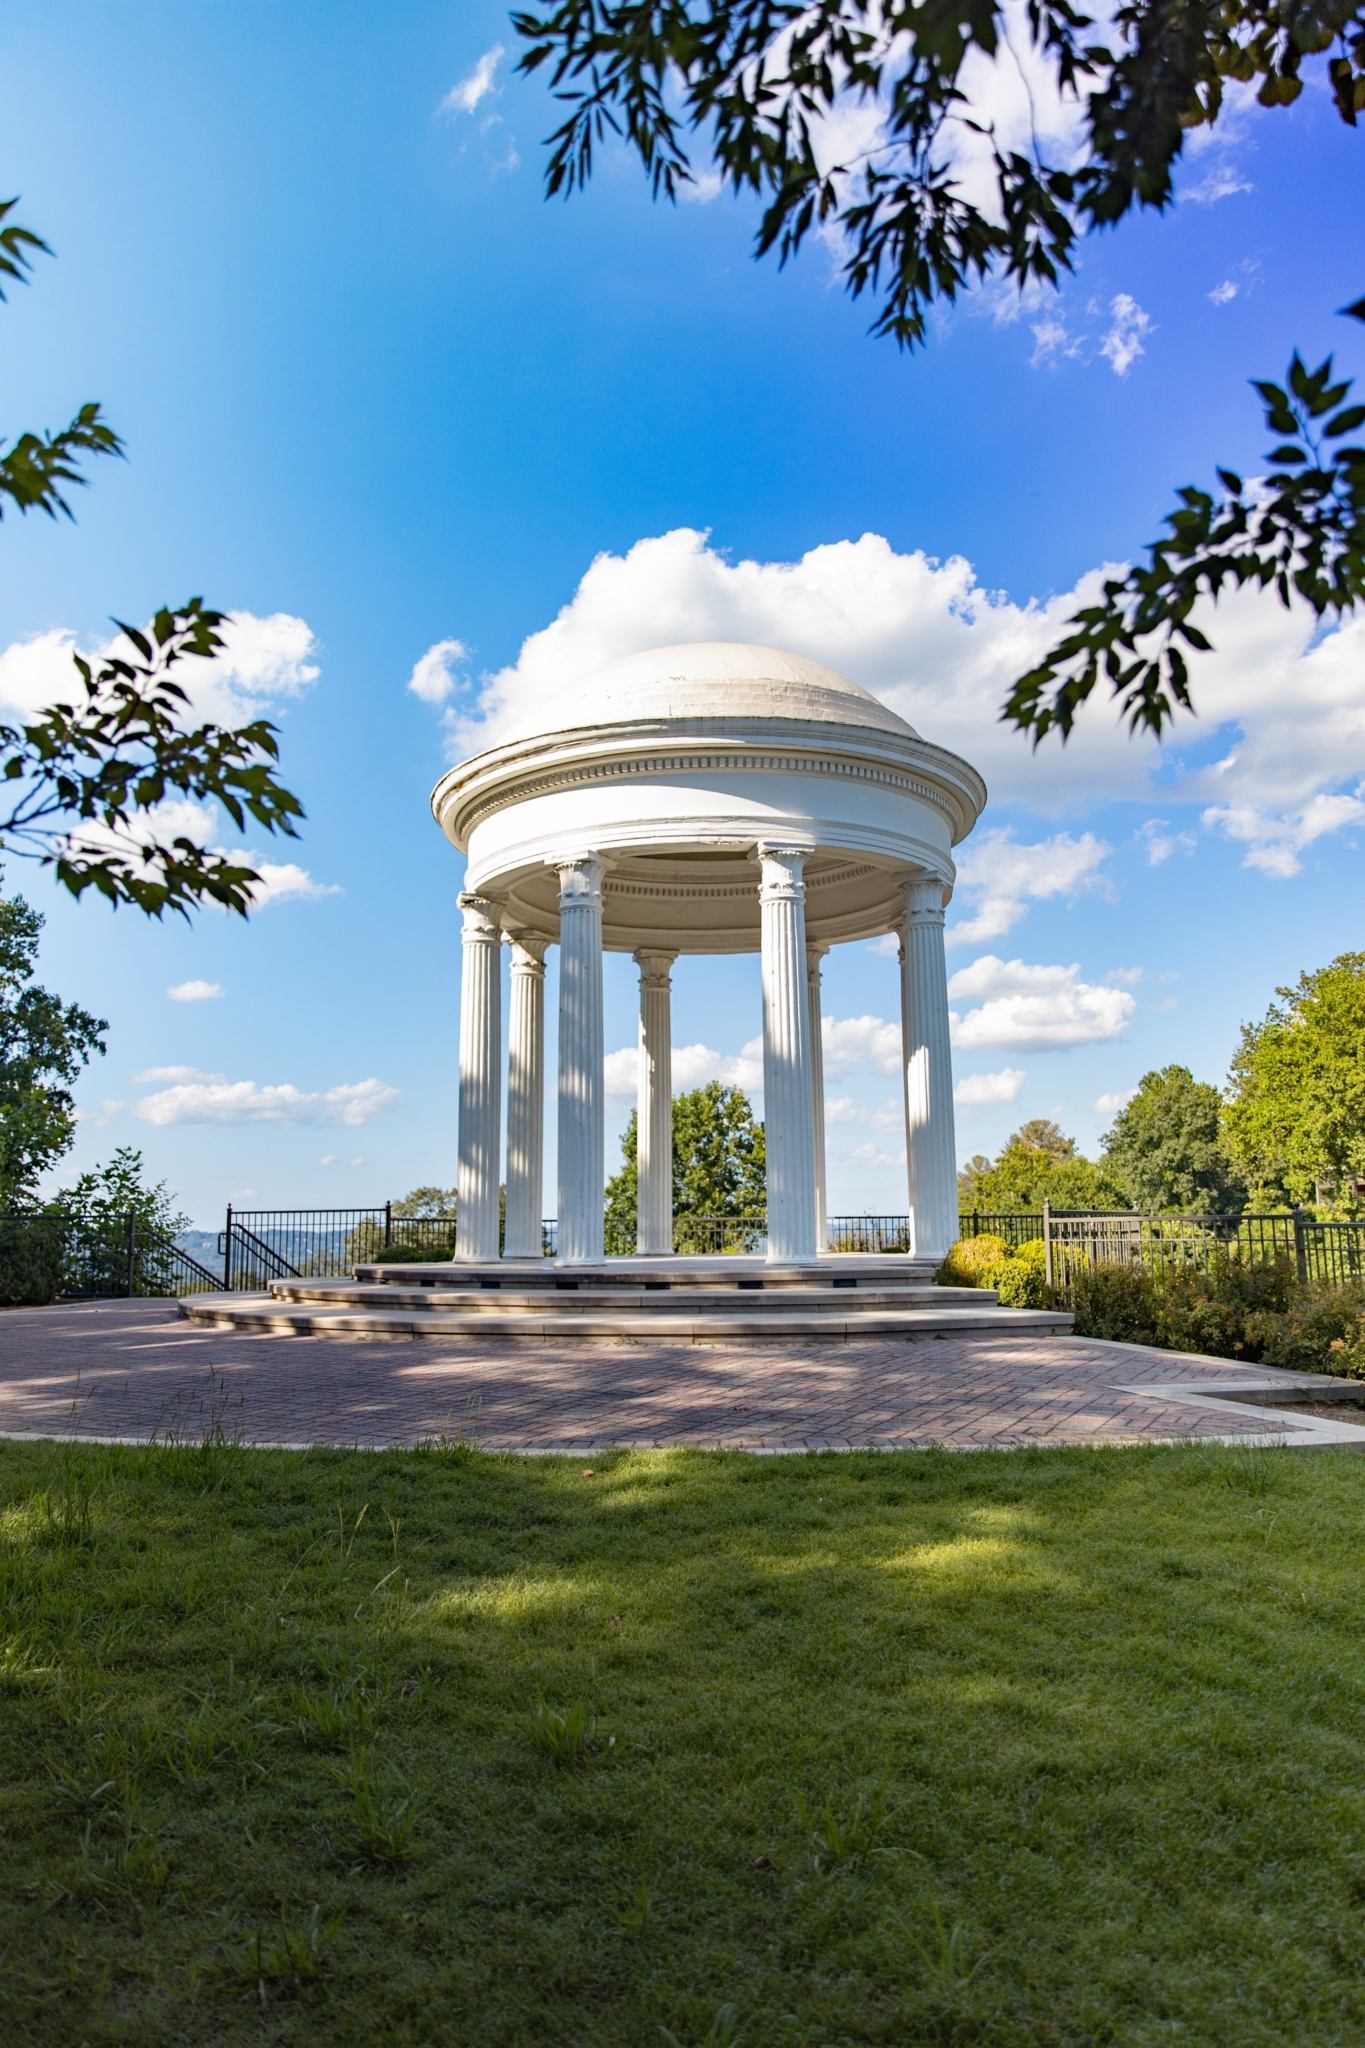 Sibyl Temple 1 11 proposal spots in Birmingham that will make you say "yes!"